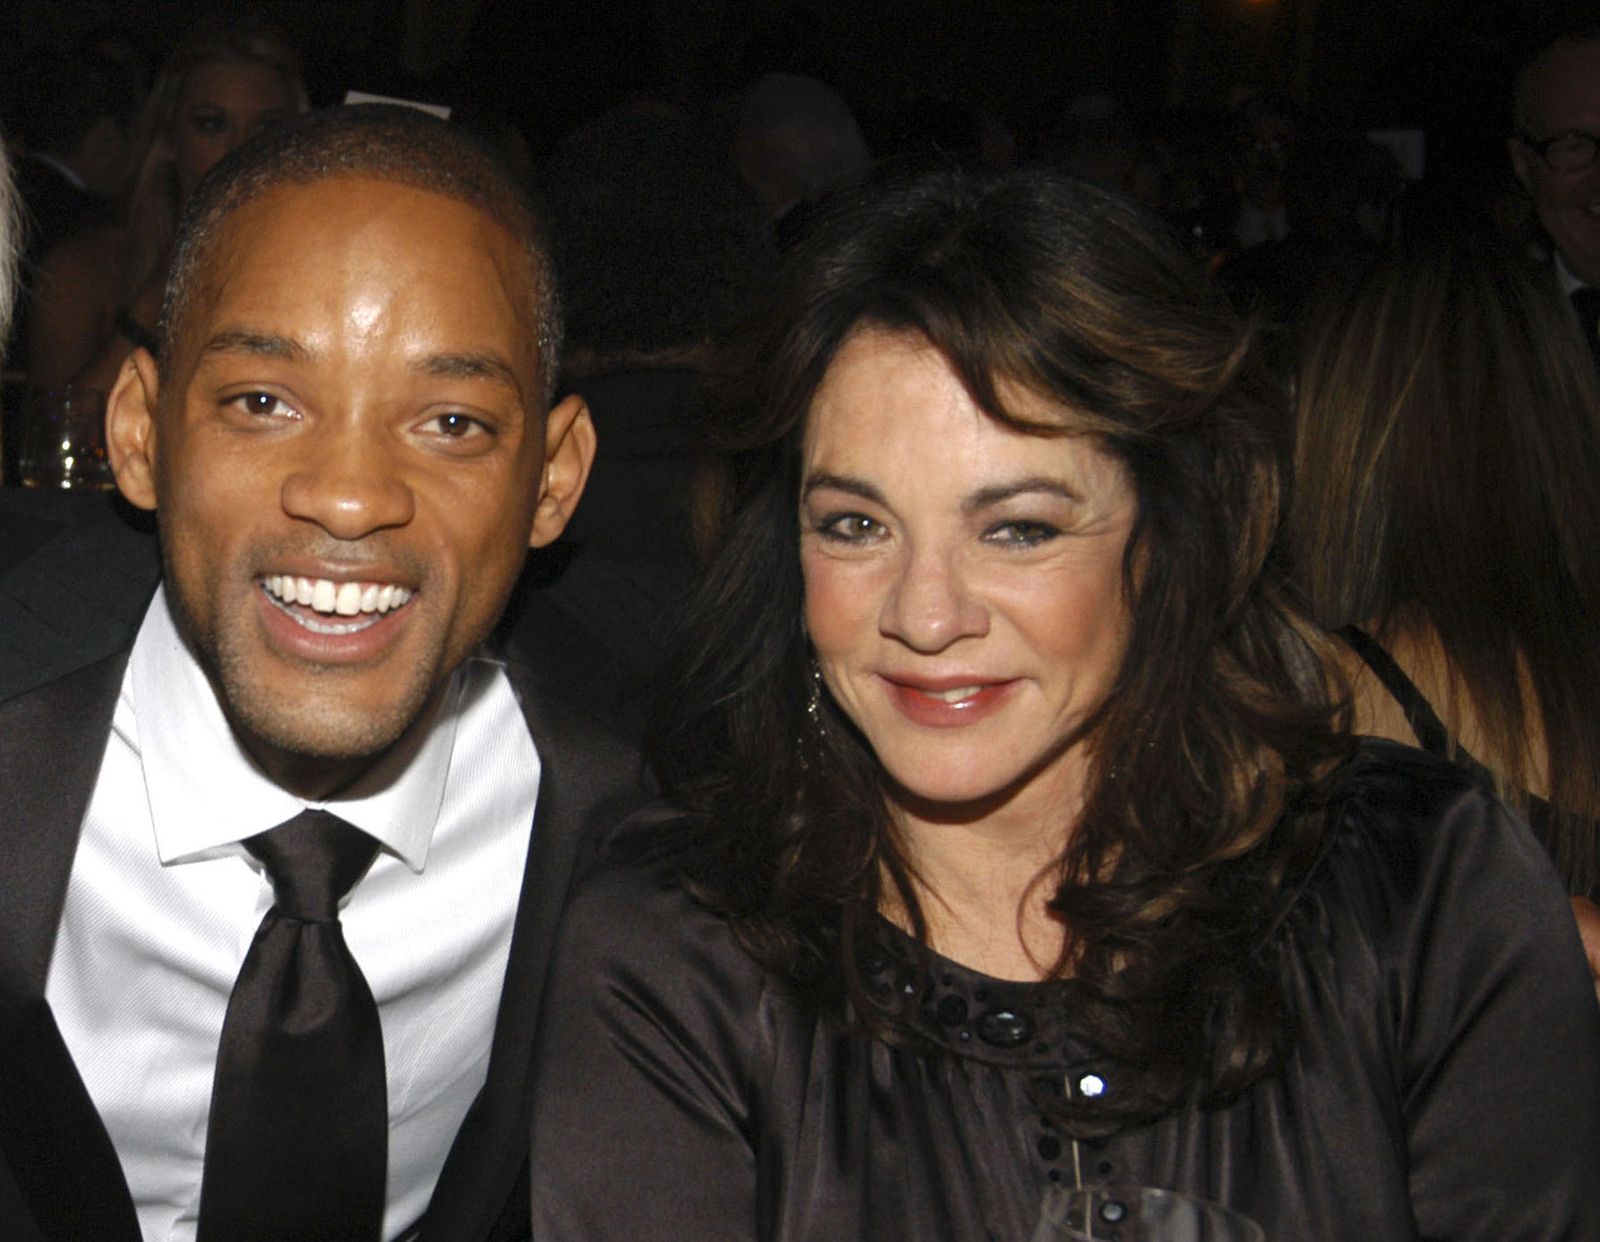 S10 Ep44: 11/04/21 - Will Smith Reveals He Fell in Love with His 'Six Degrees of Separation' Co-Star, Stockard Channing, While Married